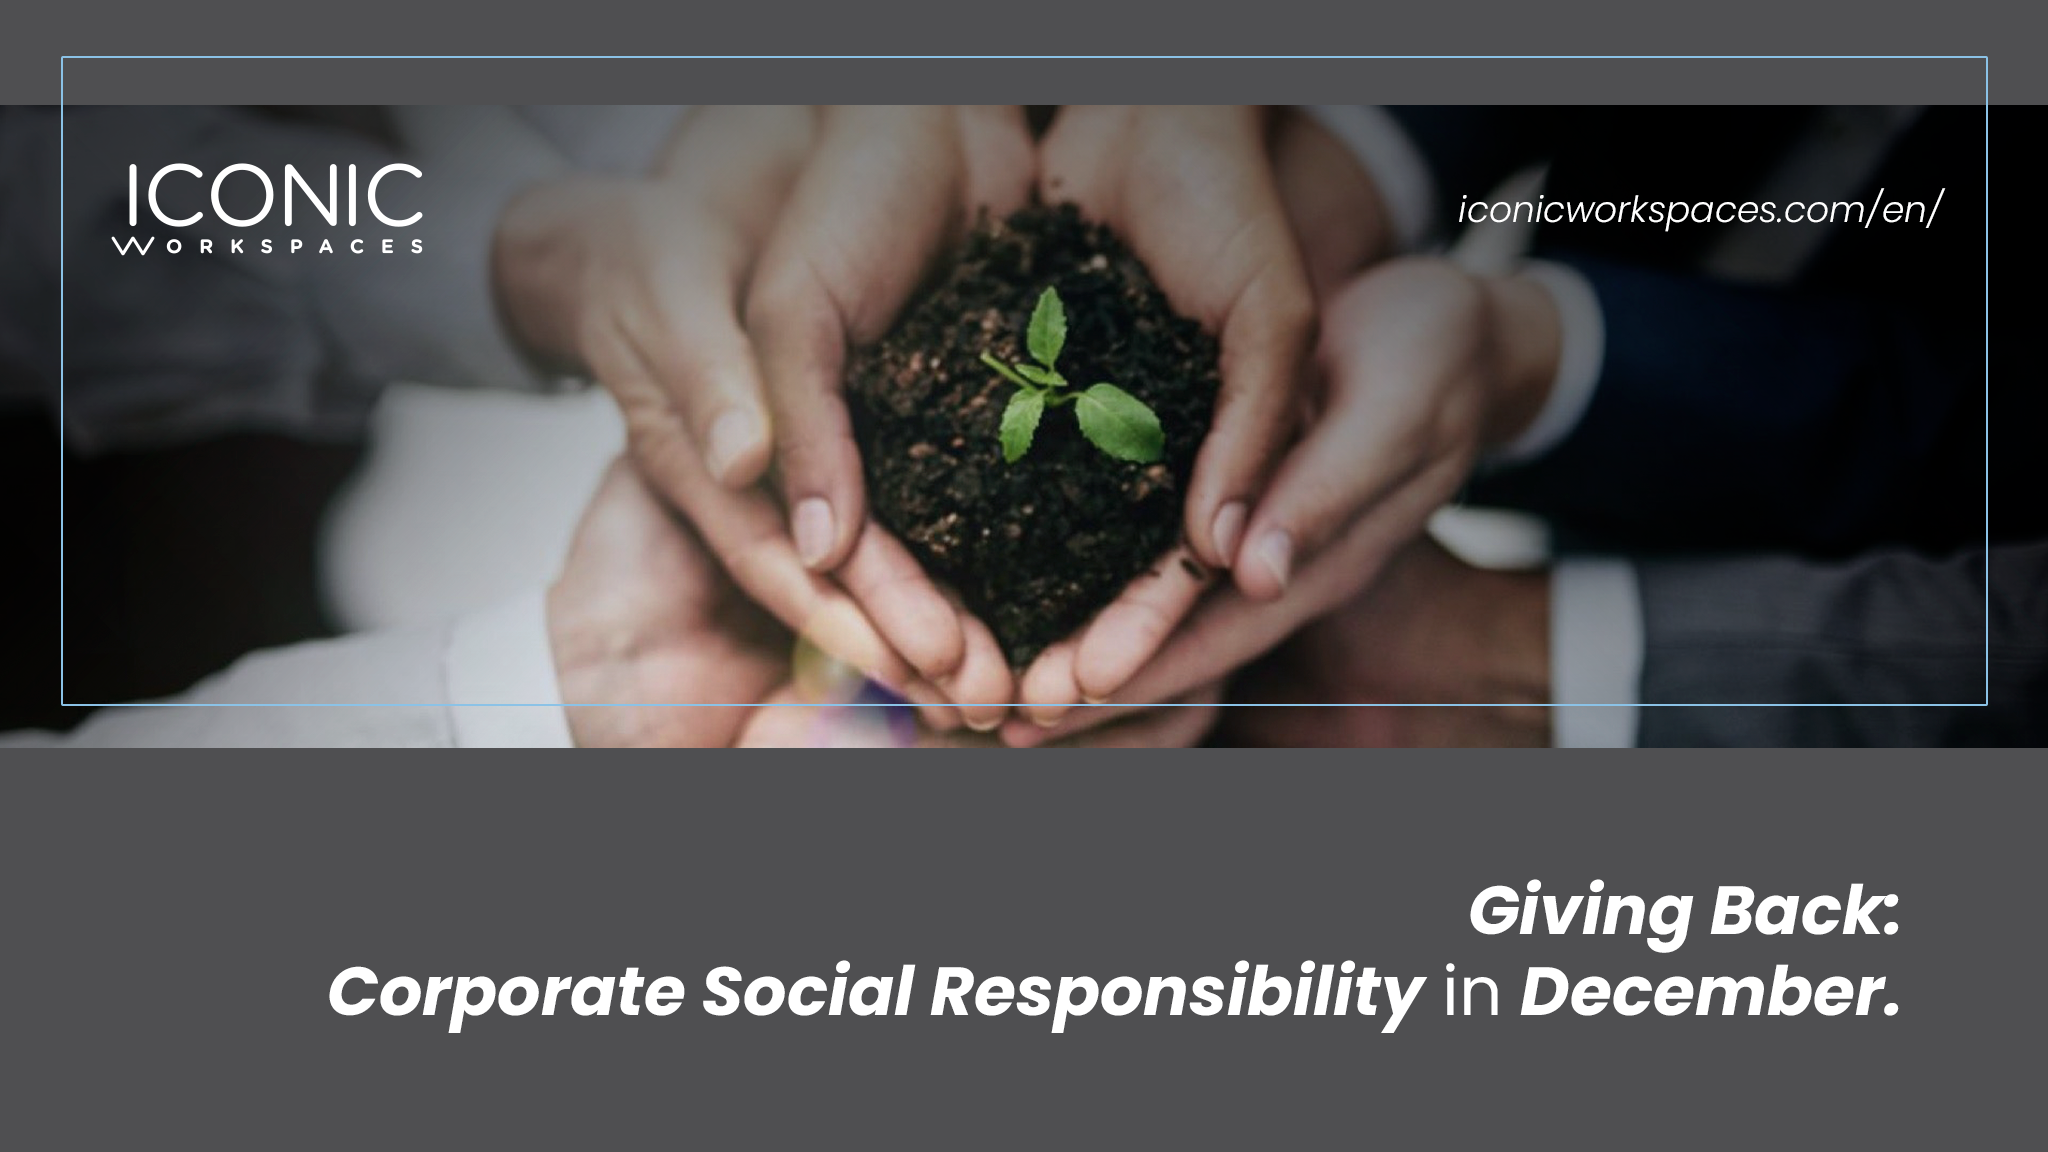 Giving Back: Corporate Social Responsibility in December